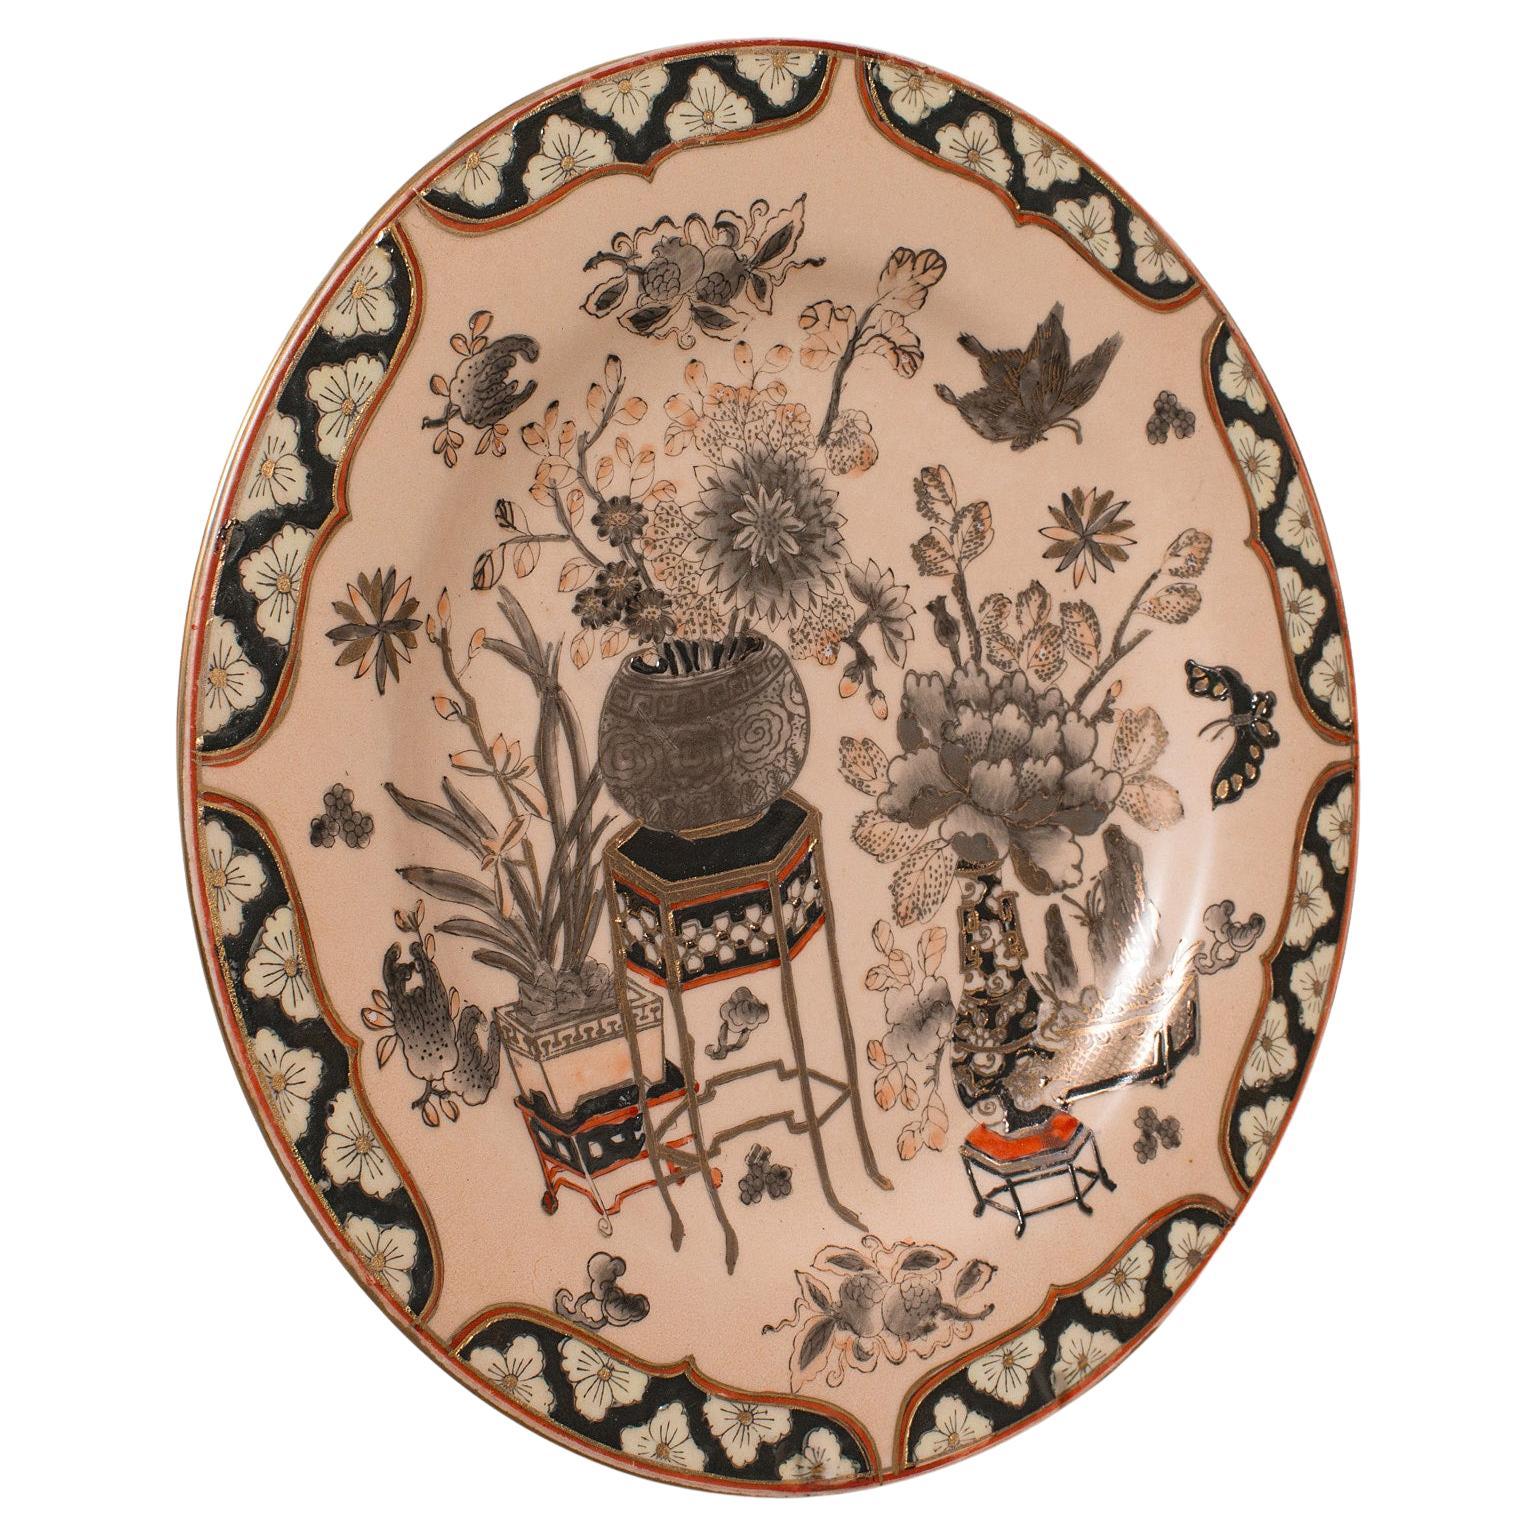 Vintage Decorative Charger, Chinese, Ceramic, Display Plate, Art Deco, C.1940